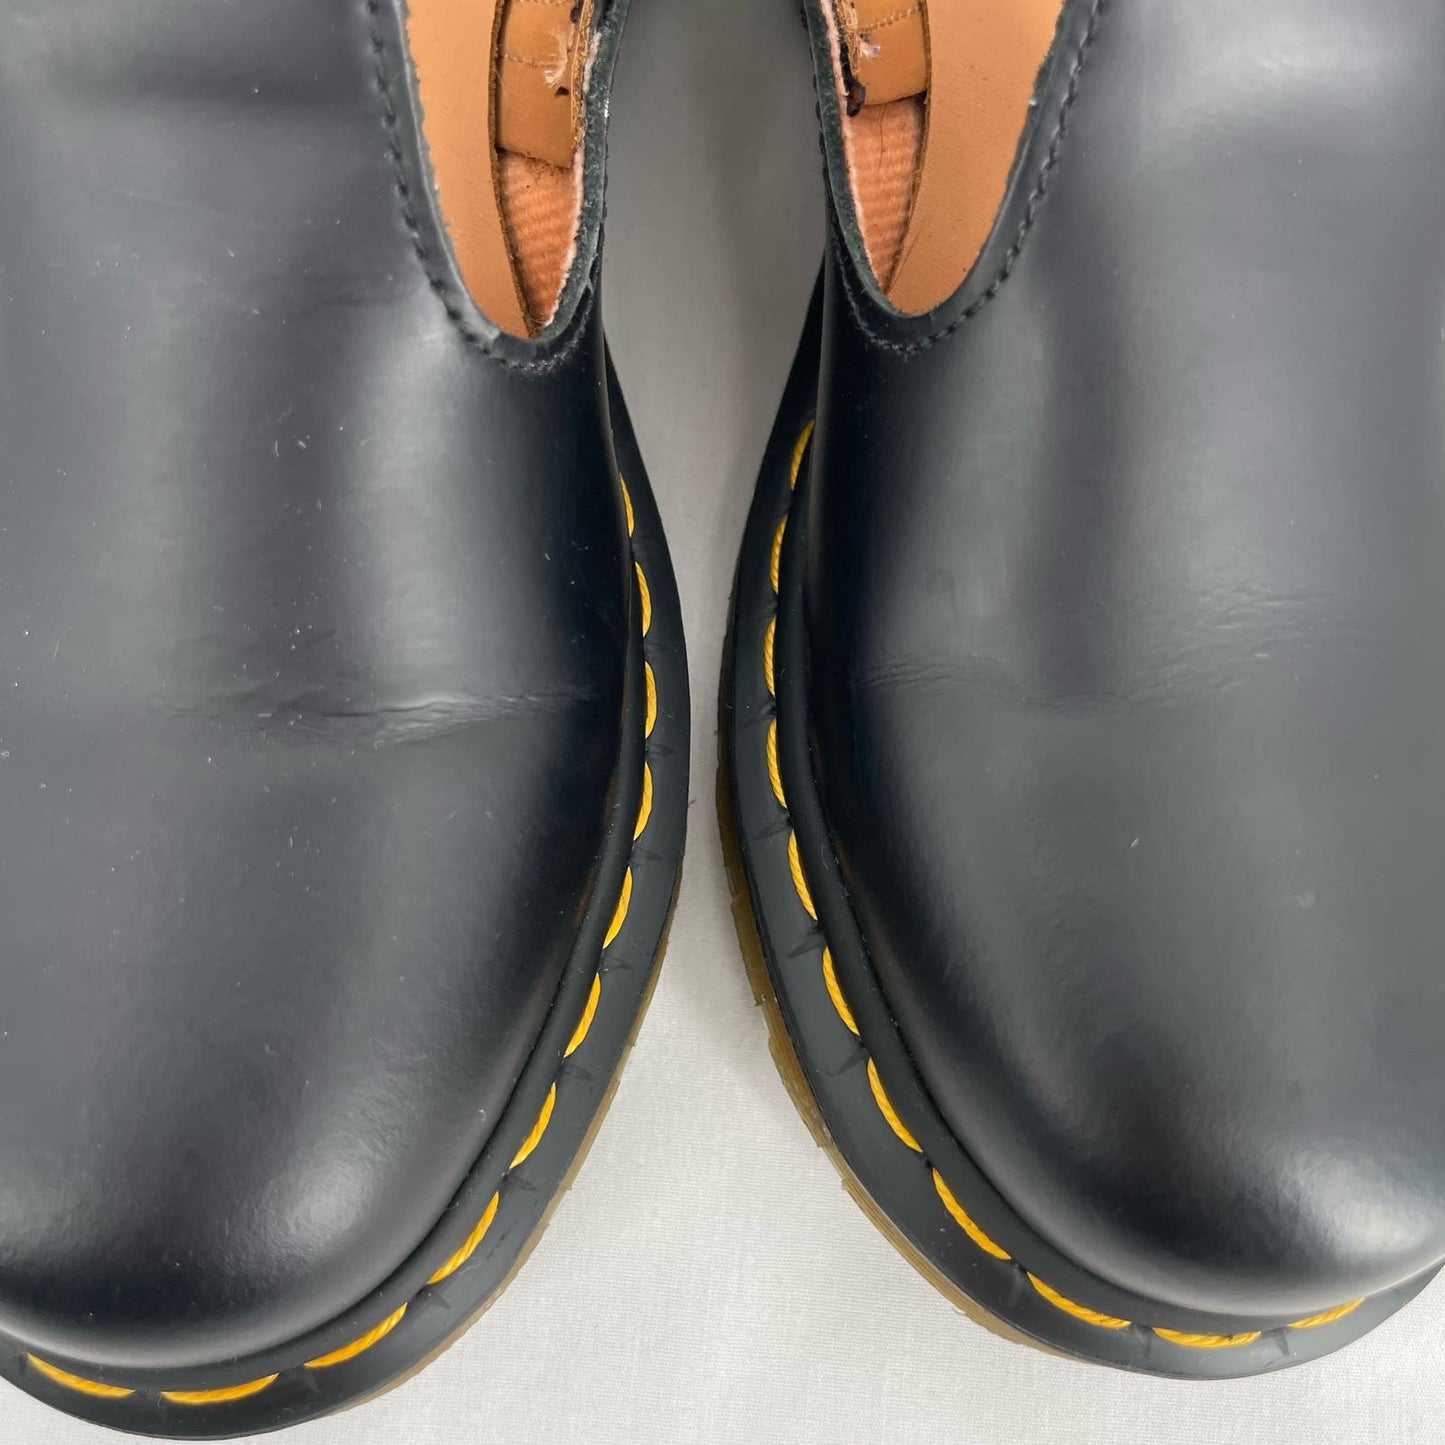 Dr. Martens Polley Mary Jane Black Smooth Leather Classic Academia Style Shoes Size 6